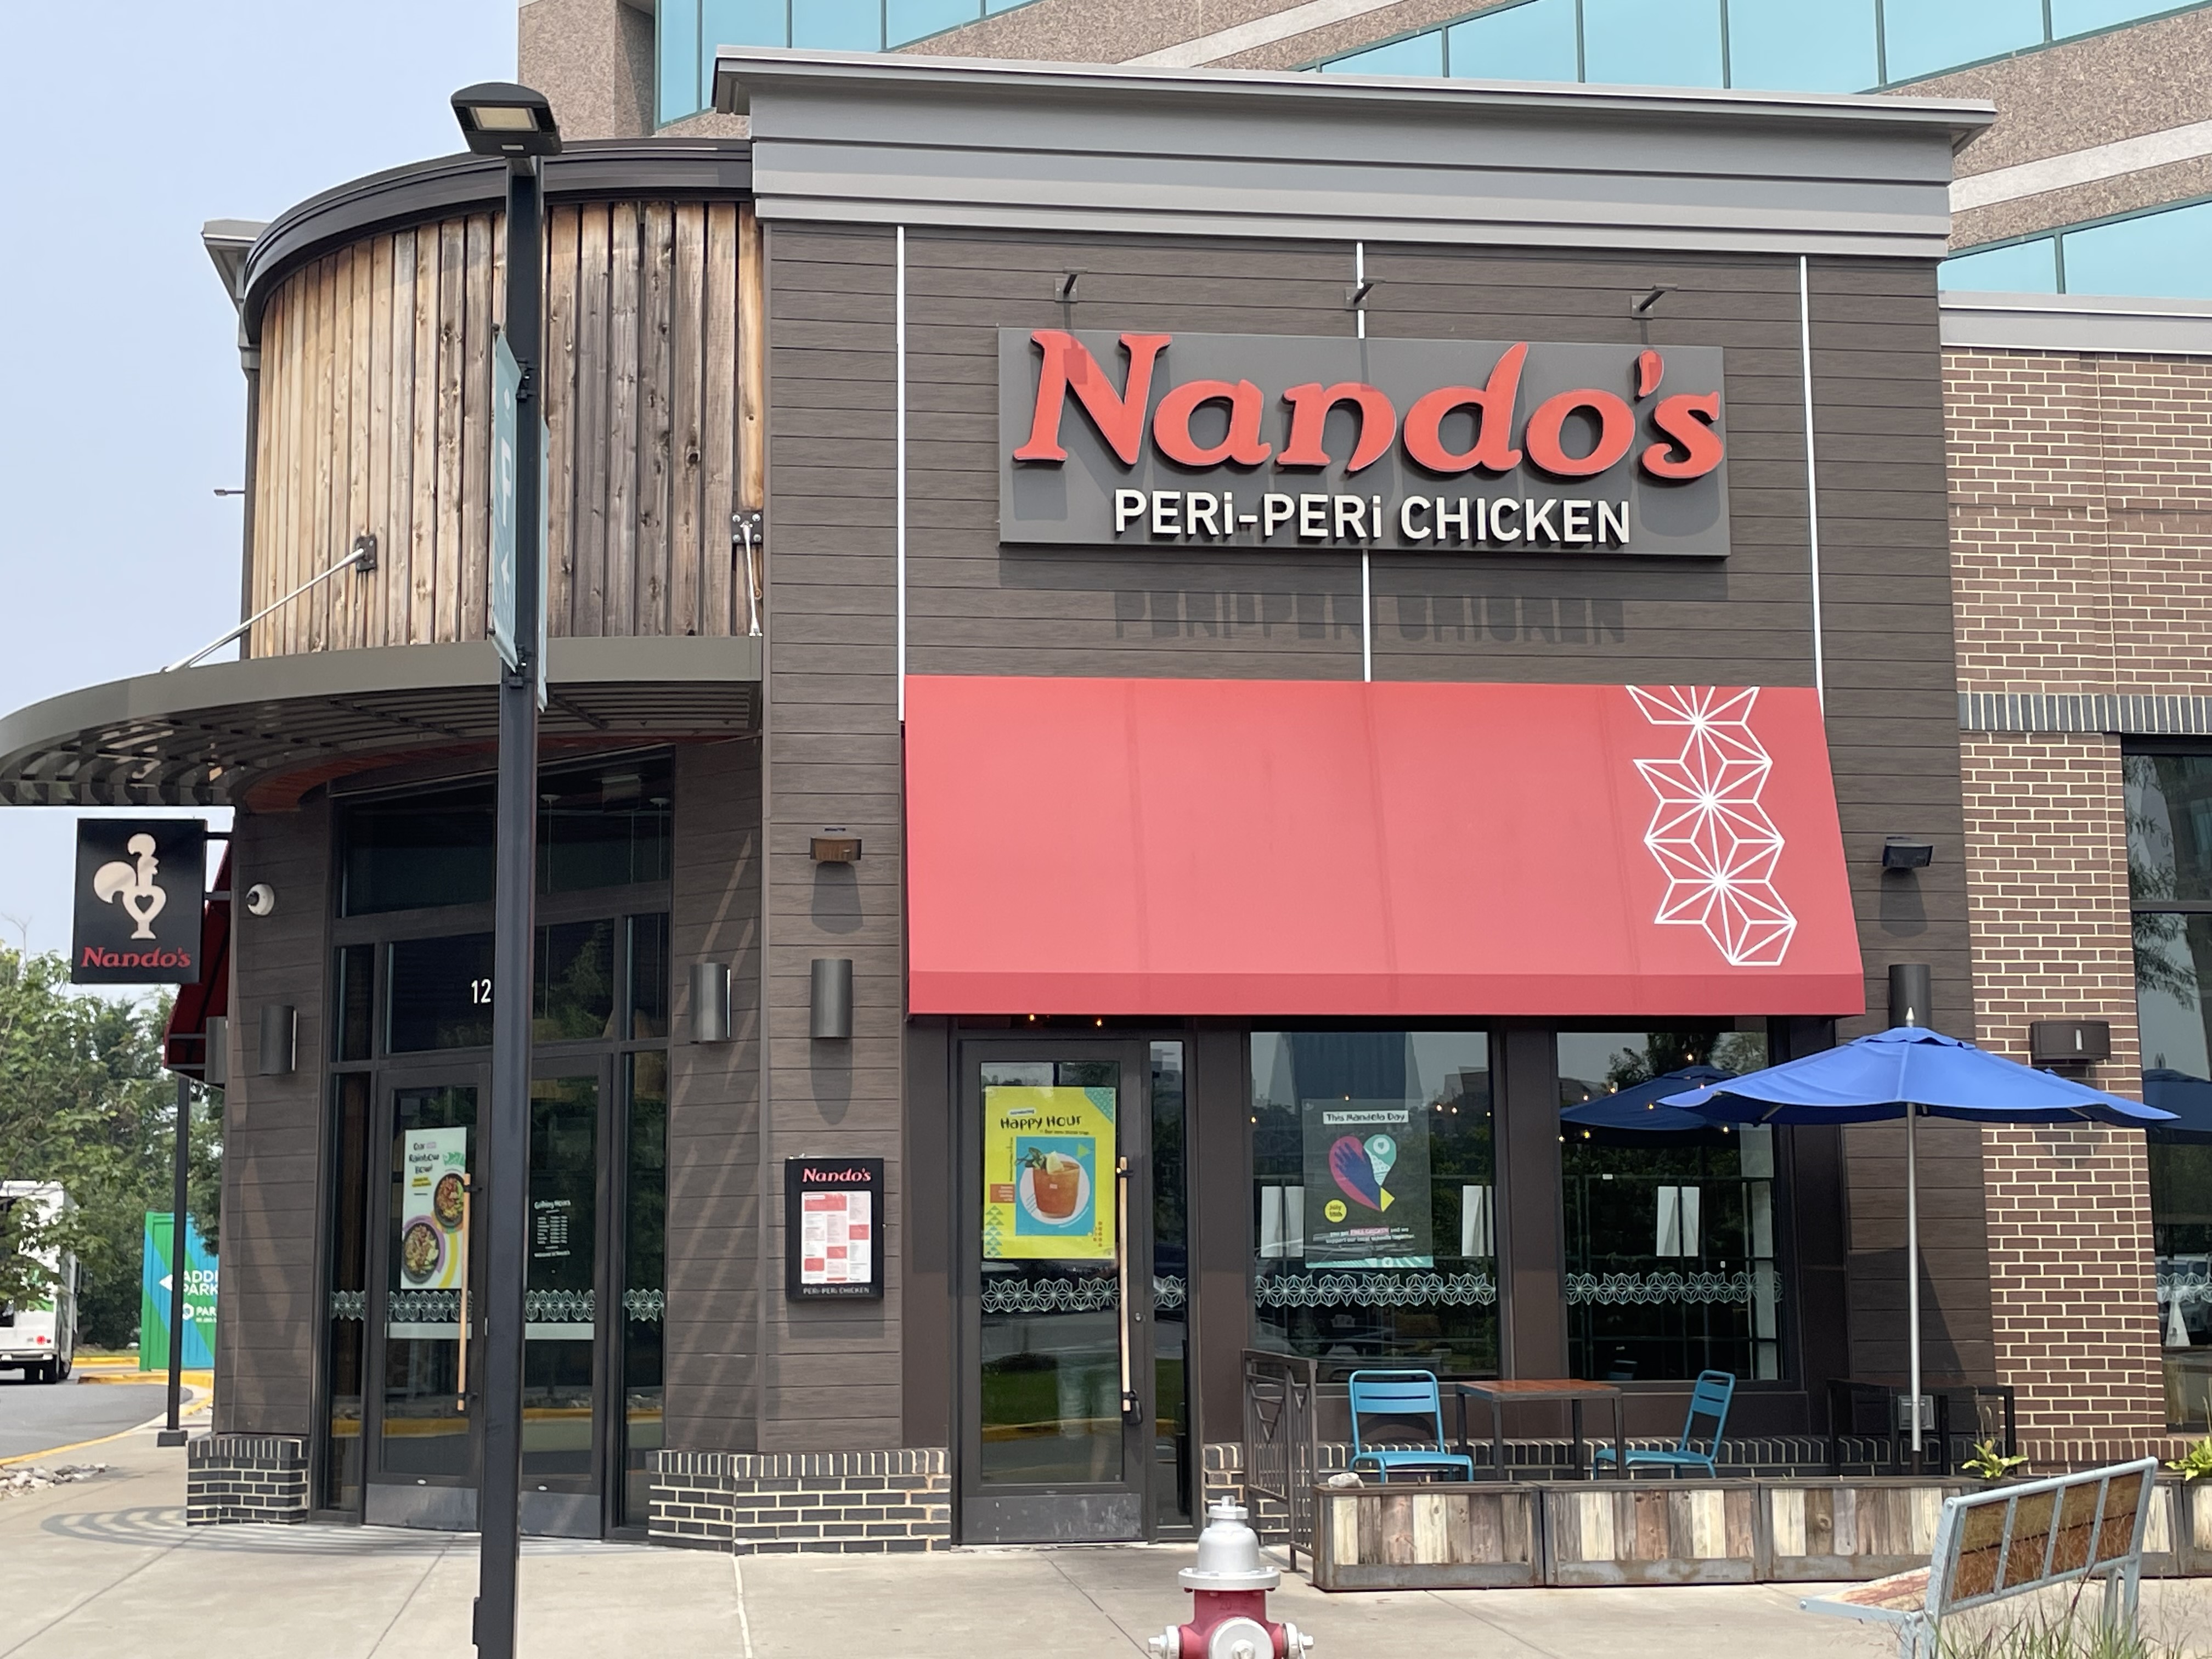 Building with brown wooden siding, with “Nando’s Peri-Peri Chicken” sign. Building sits along sidewalk, with small patio and seating in front.